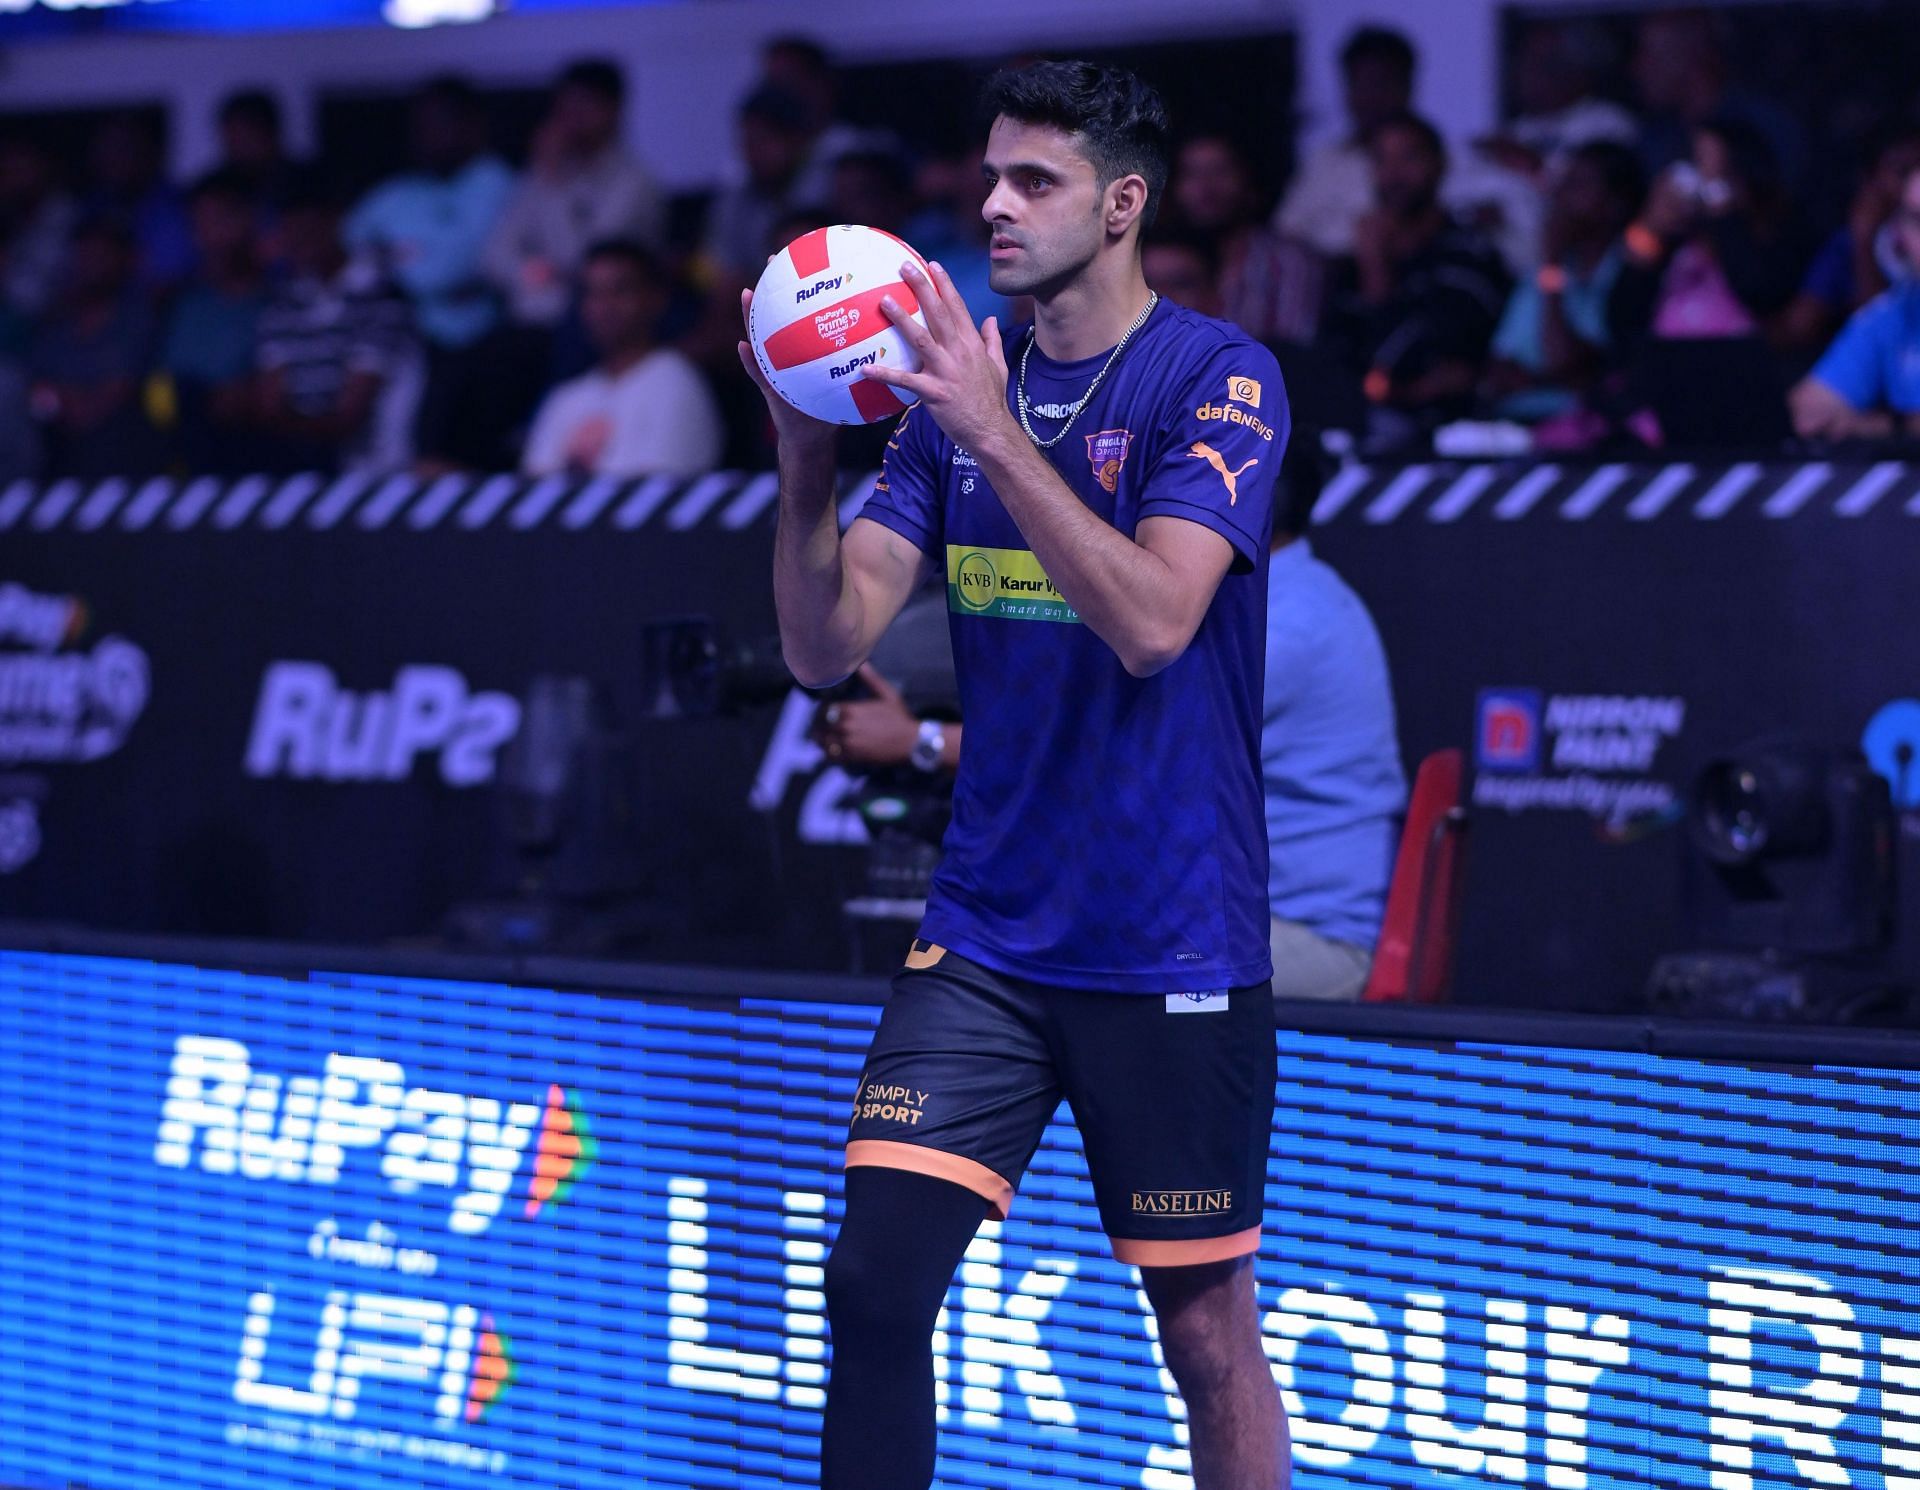 (Image Credits: RuPay Prime Volleyball League)